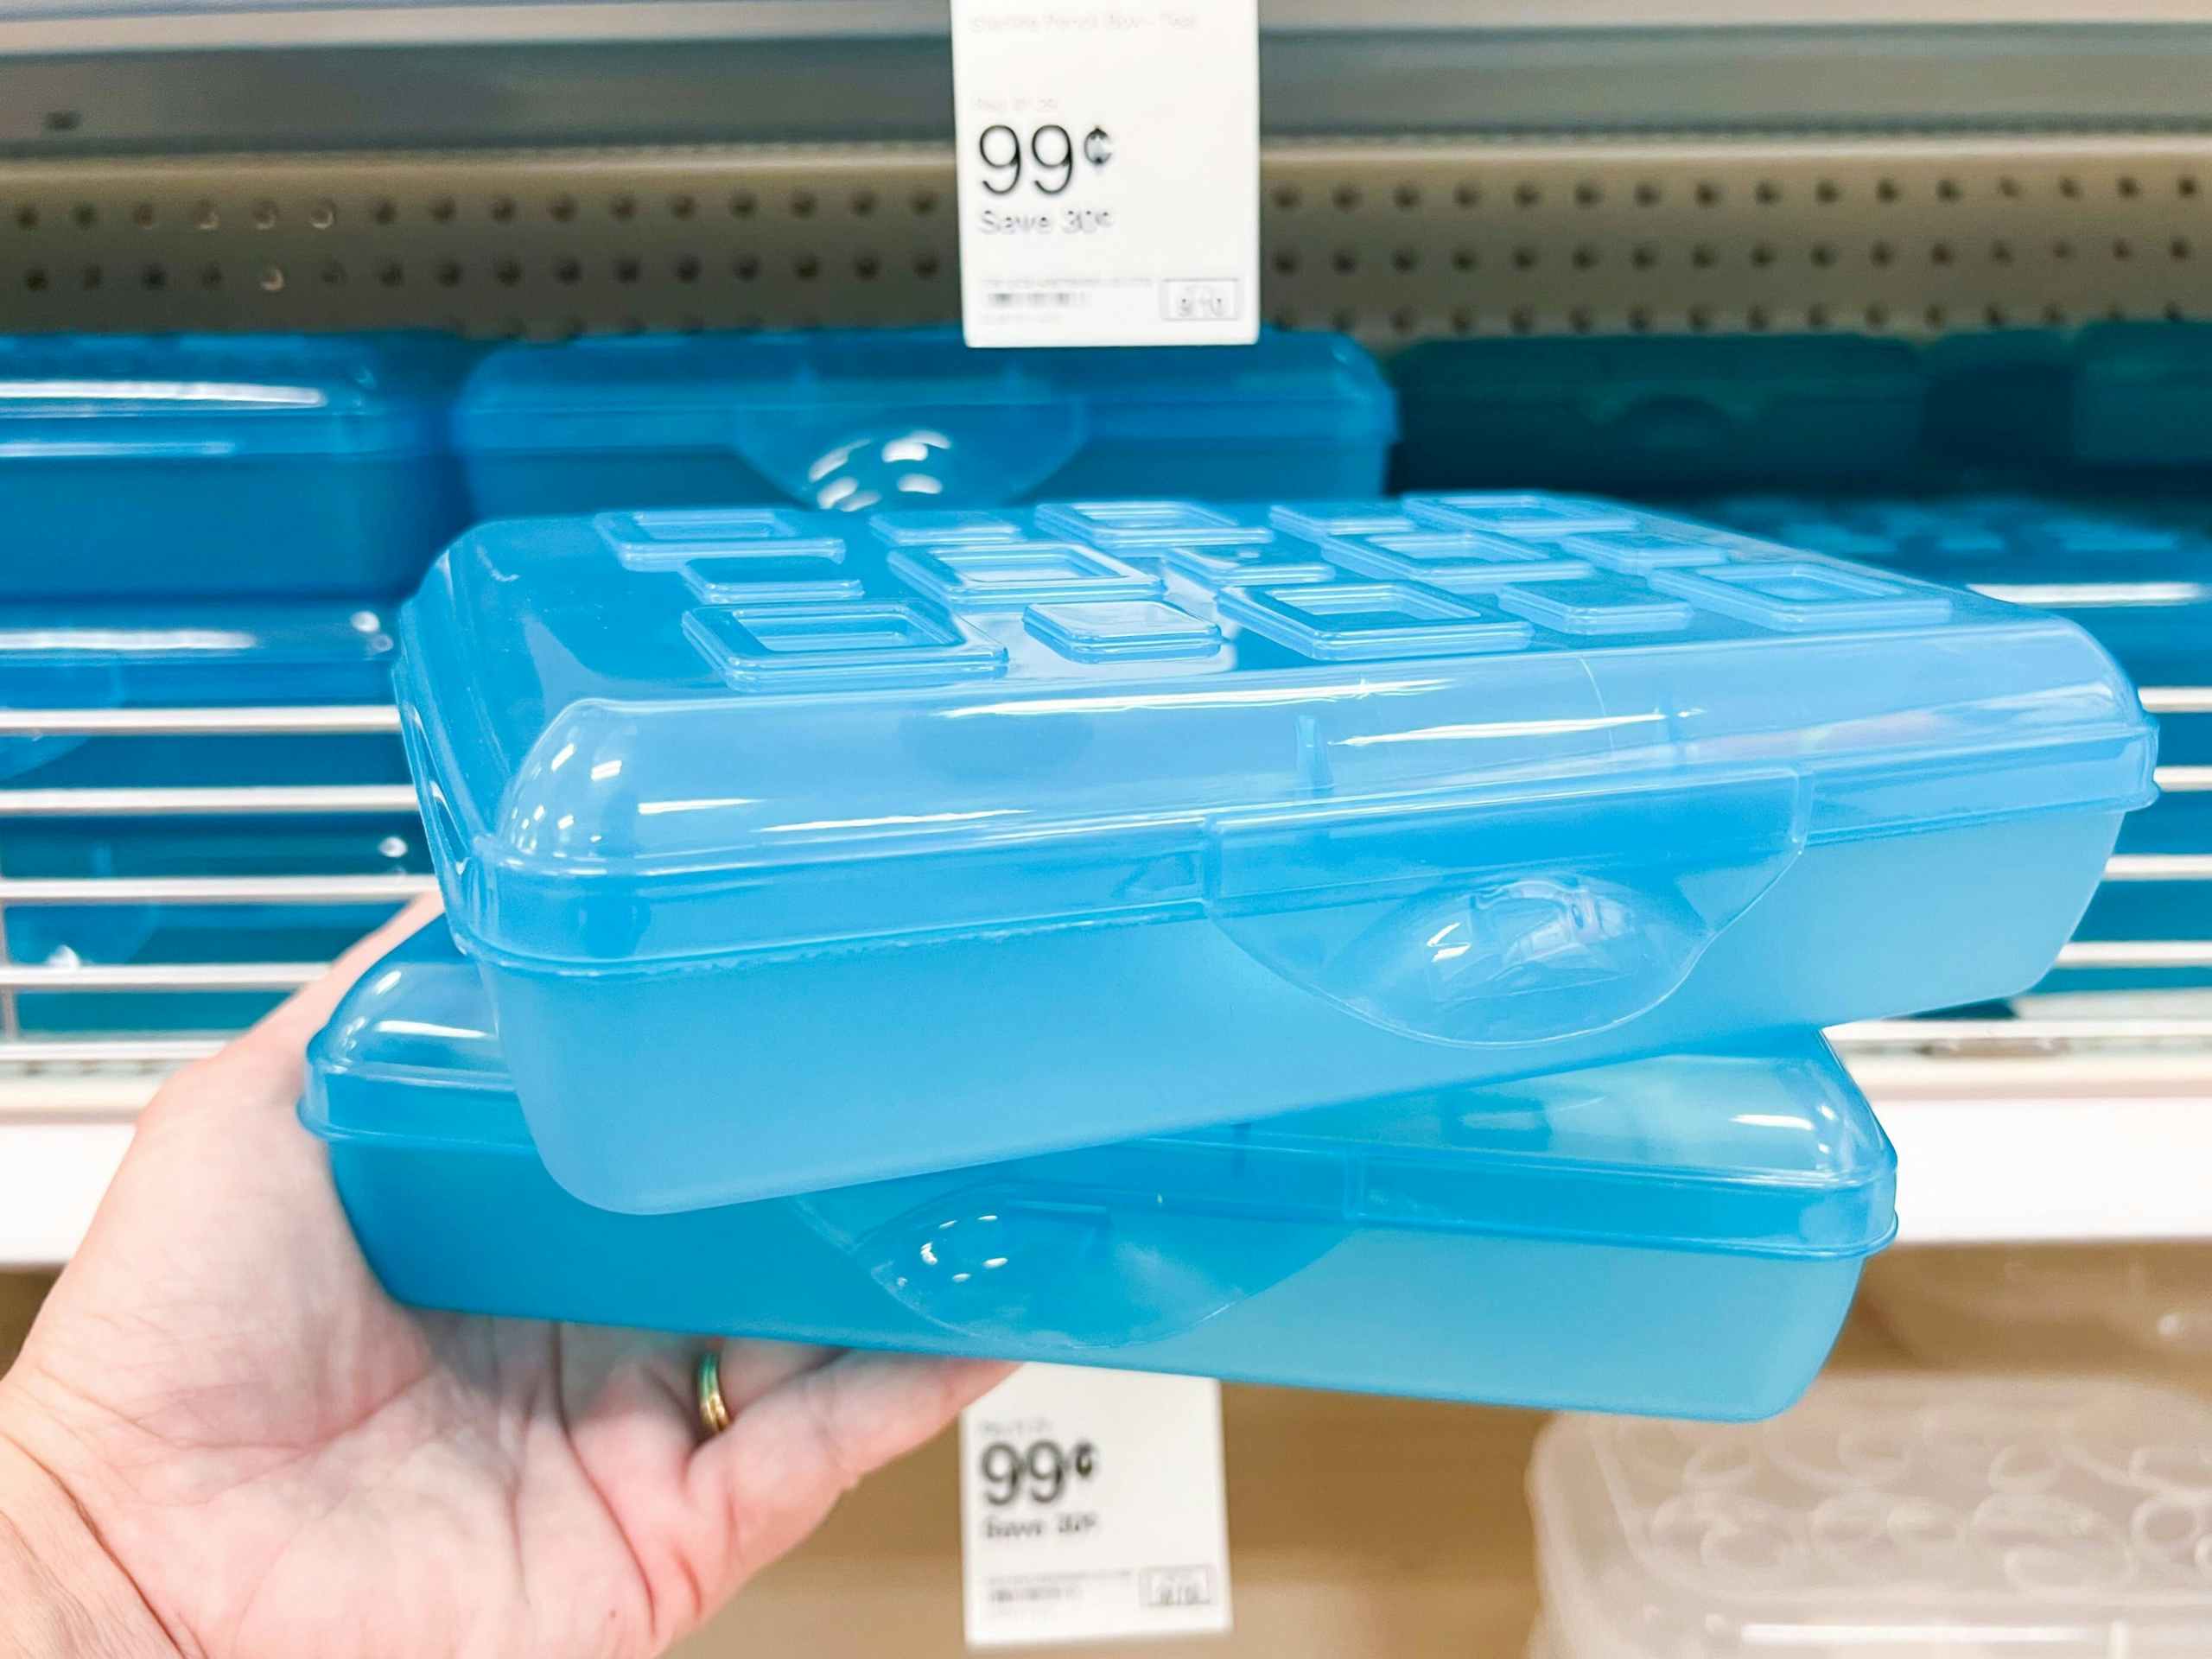 hand holding two blue Sterilite pencil boxes in front of Target shelf with the 99 cent sale price tag visible